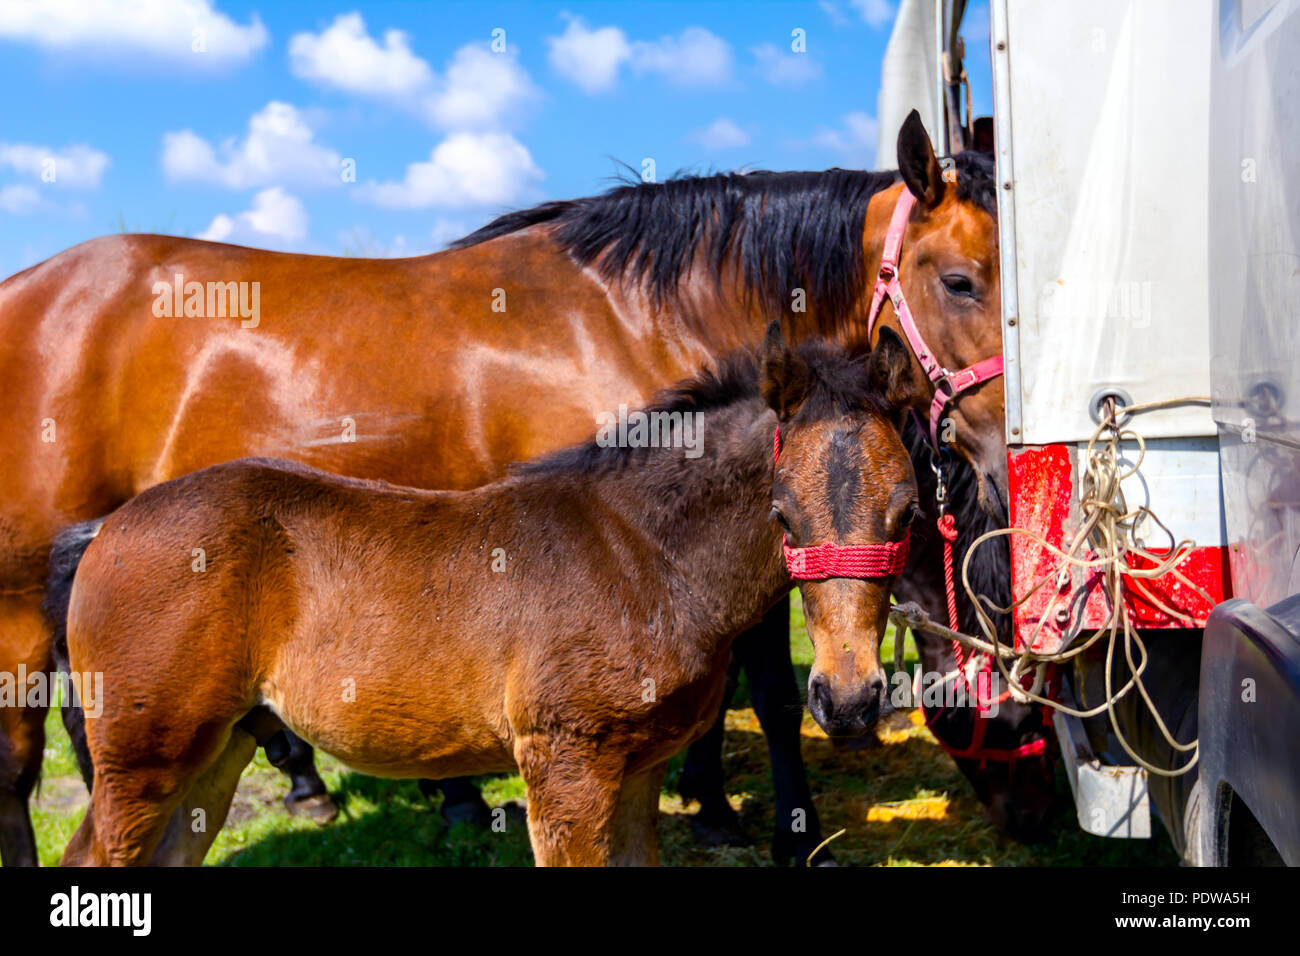 Brown thoroughbred mare and foal, horses are tied to the truck with reins, harness. Stock Photo